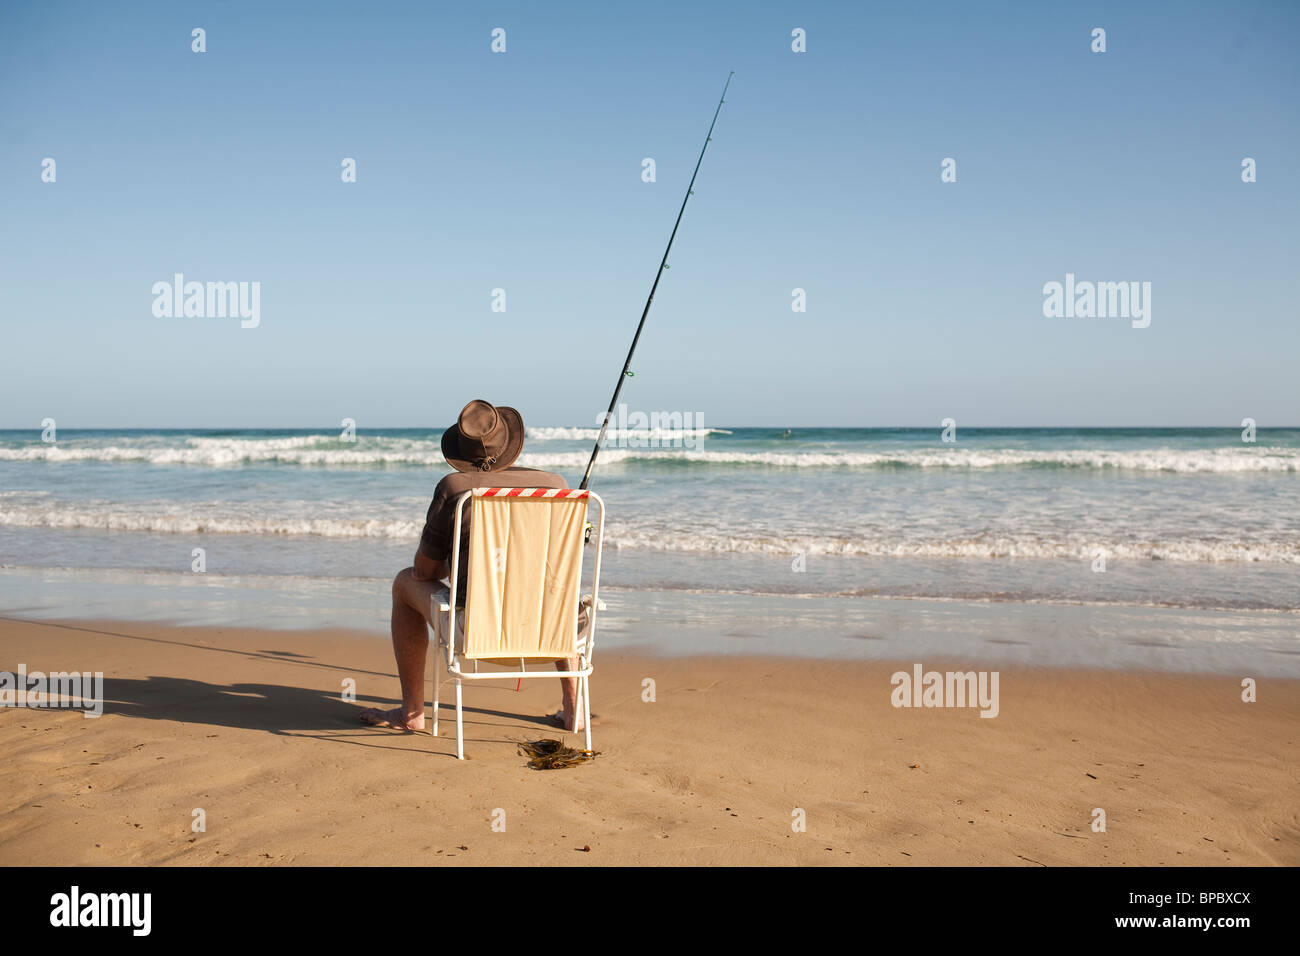 Fisherman sitting in a beach chair surf casting in the ocean Stock